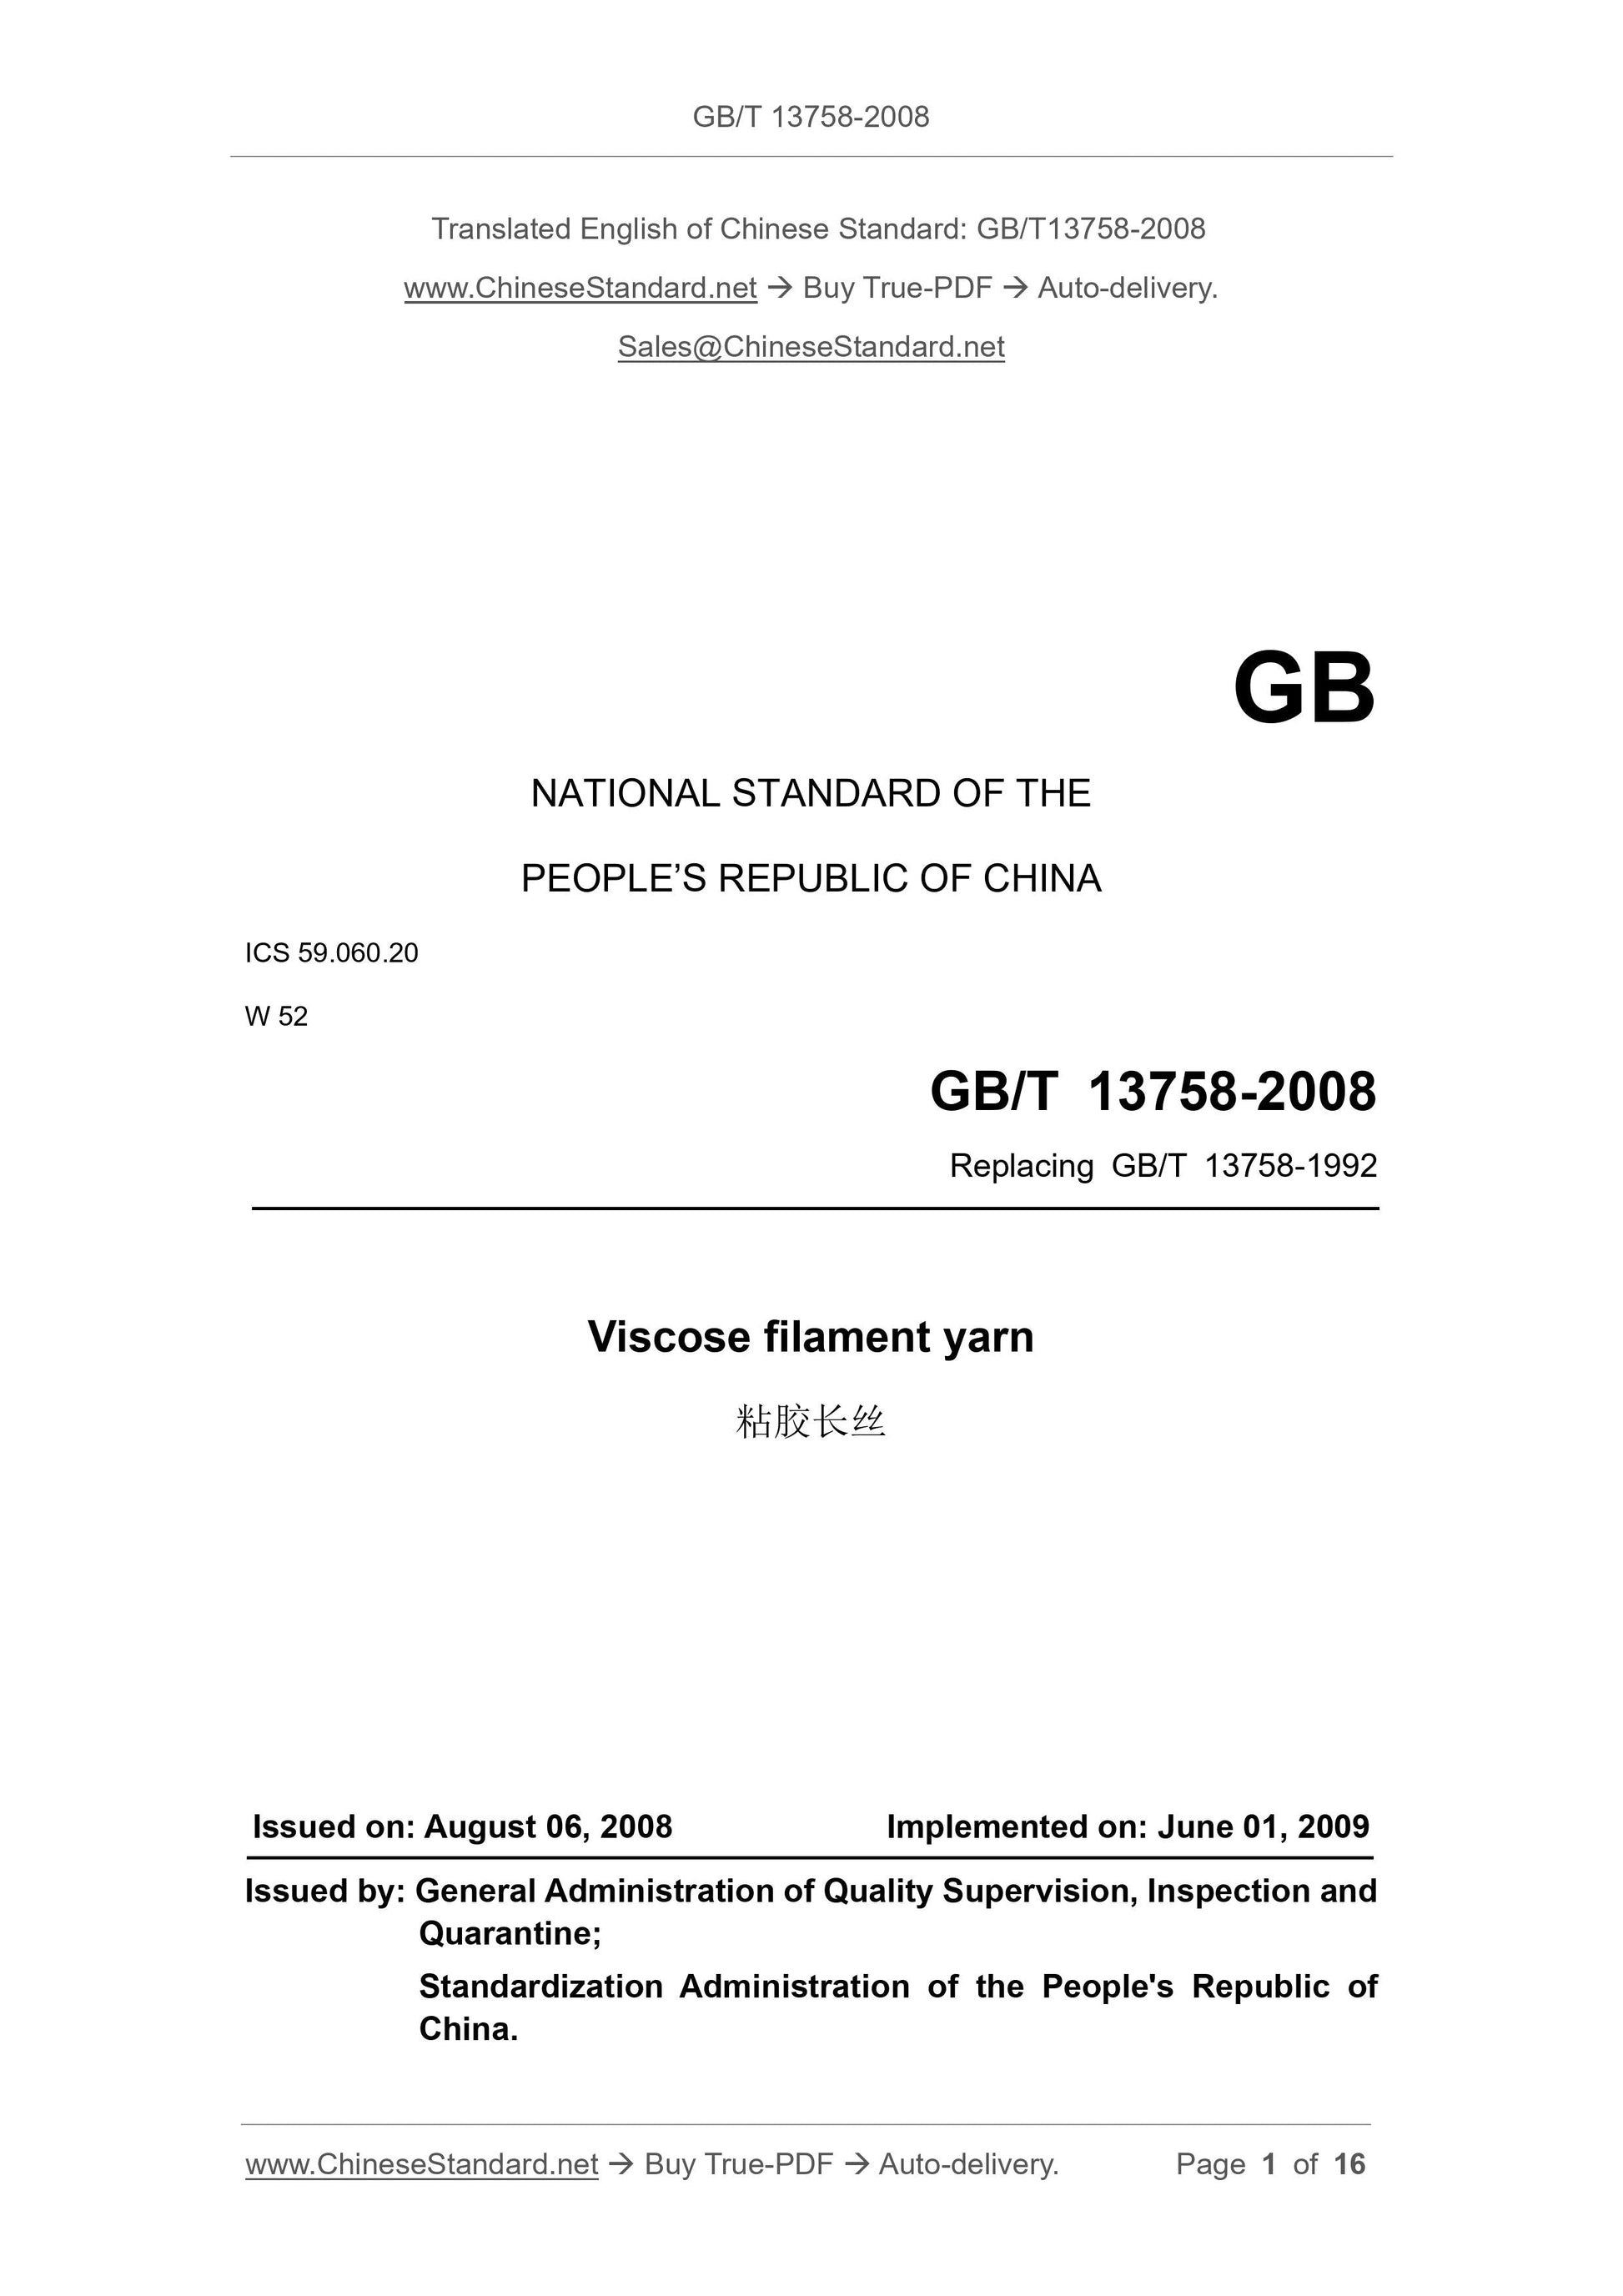 GB/T 13758-2008 Page 1